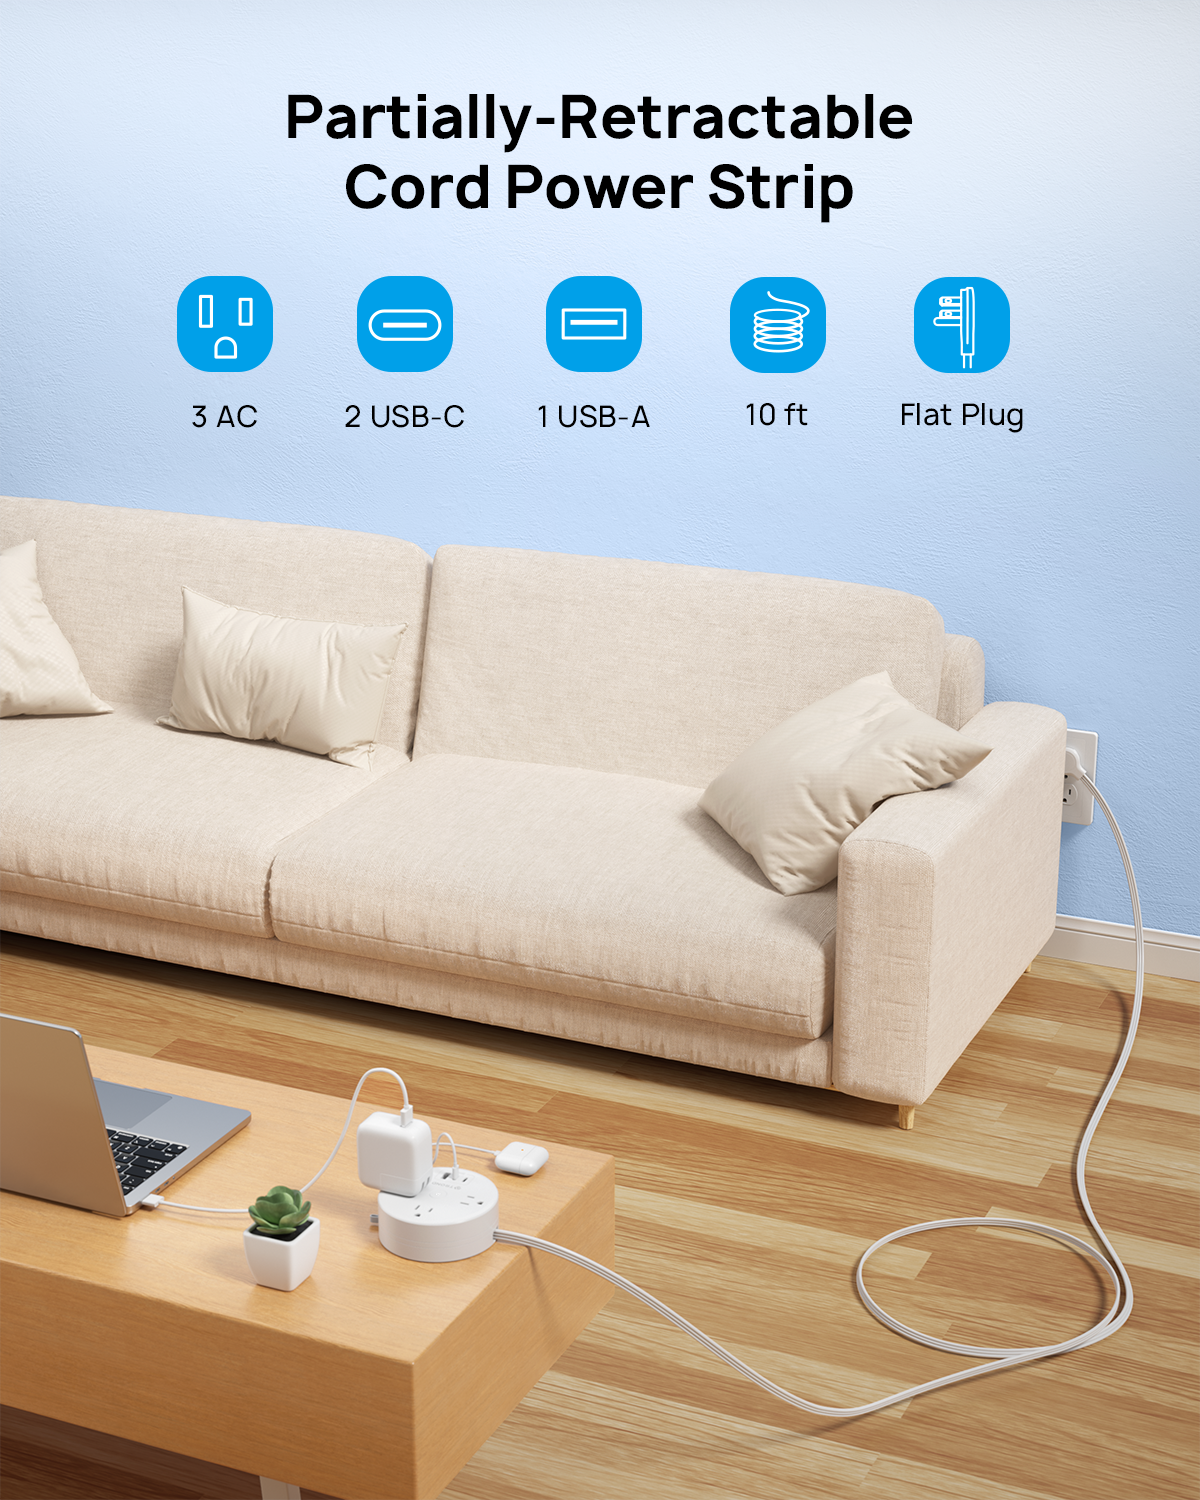 Flat Plug Power Strip - Extension Cord 10FT Partially-Retractable